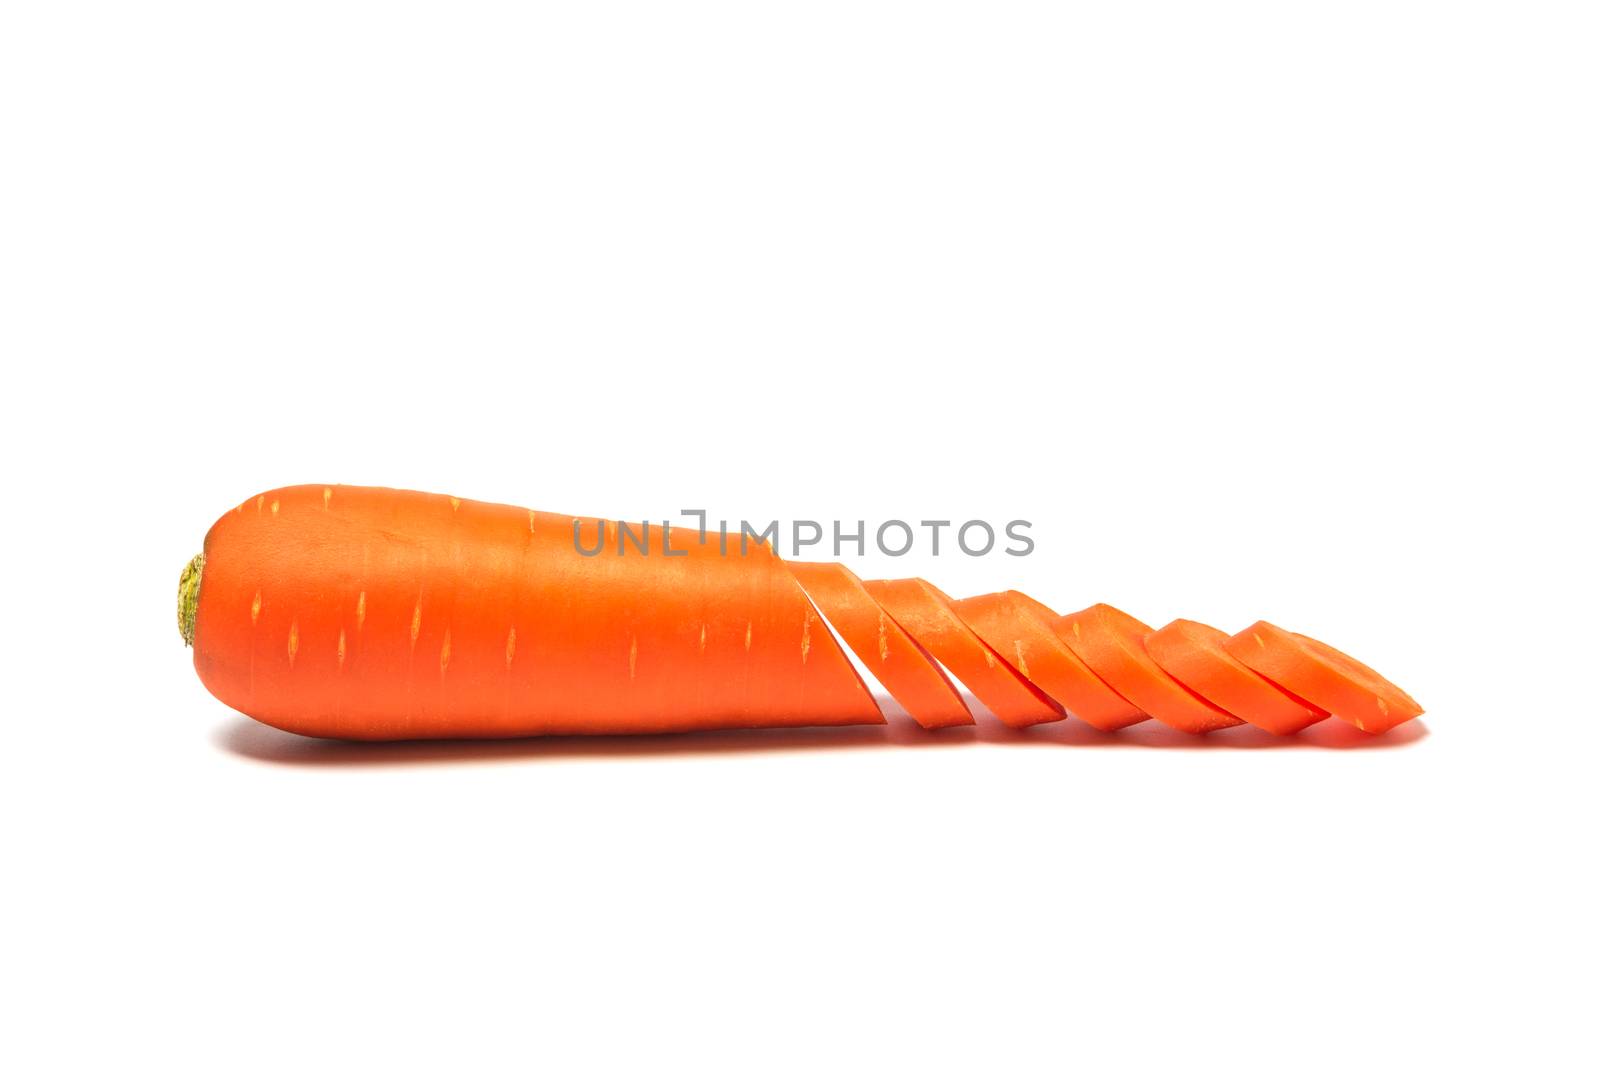 Fresh carrot and carrot slice isolated on white background. Close up of Carrot.